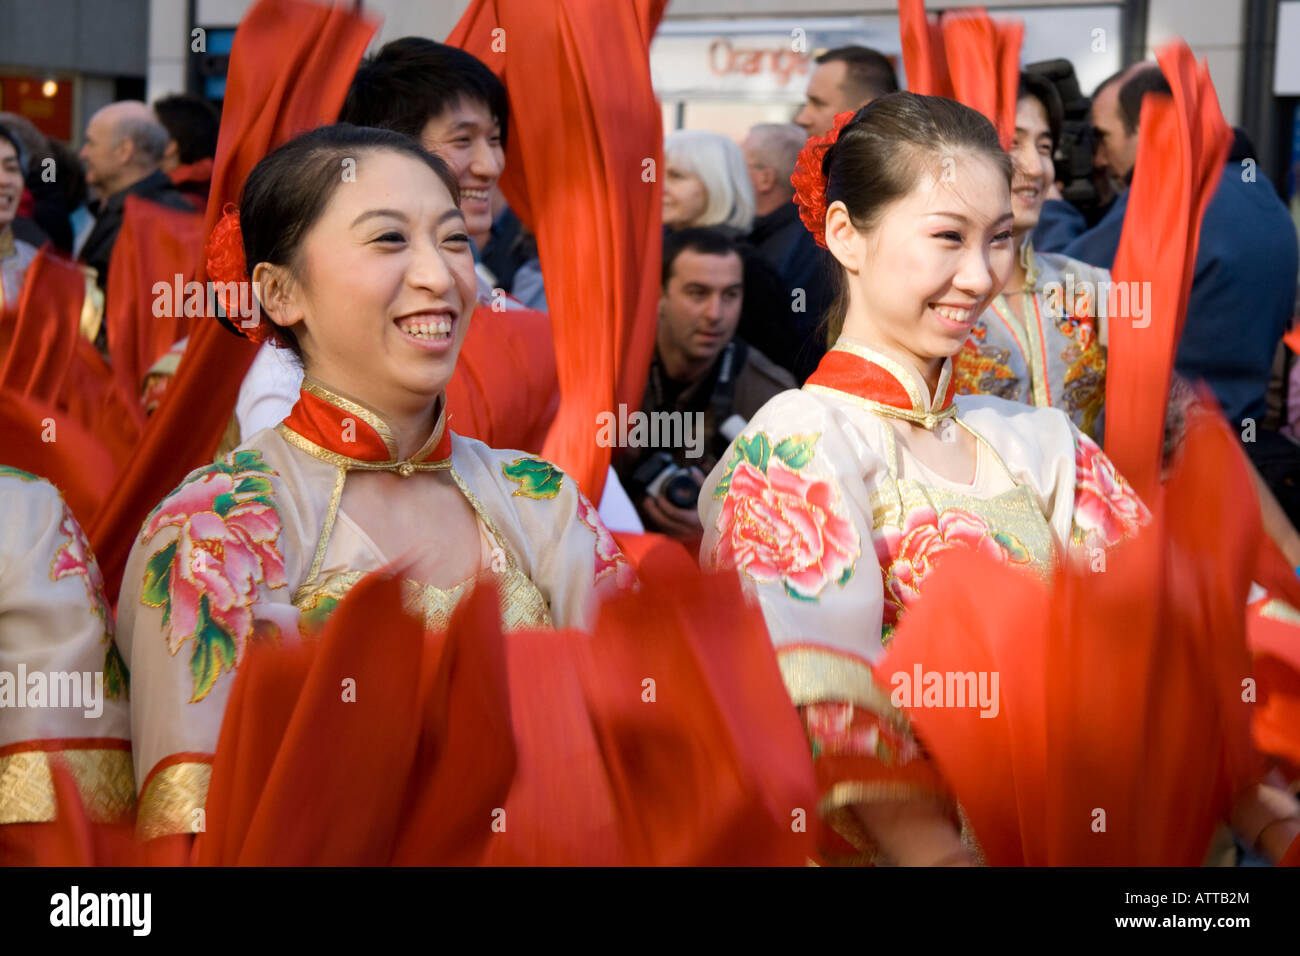 The official Chinese New Year Parade in London was held on the 10th February 2008. Stock Photo